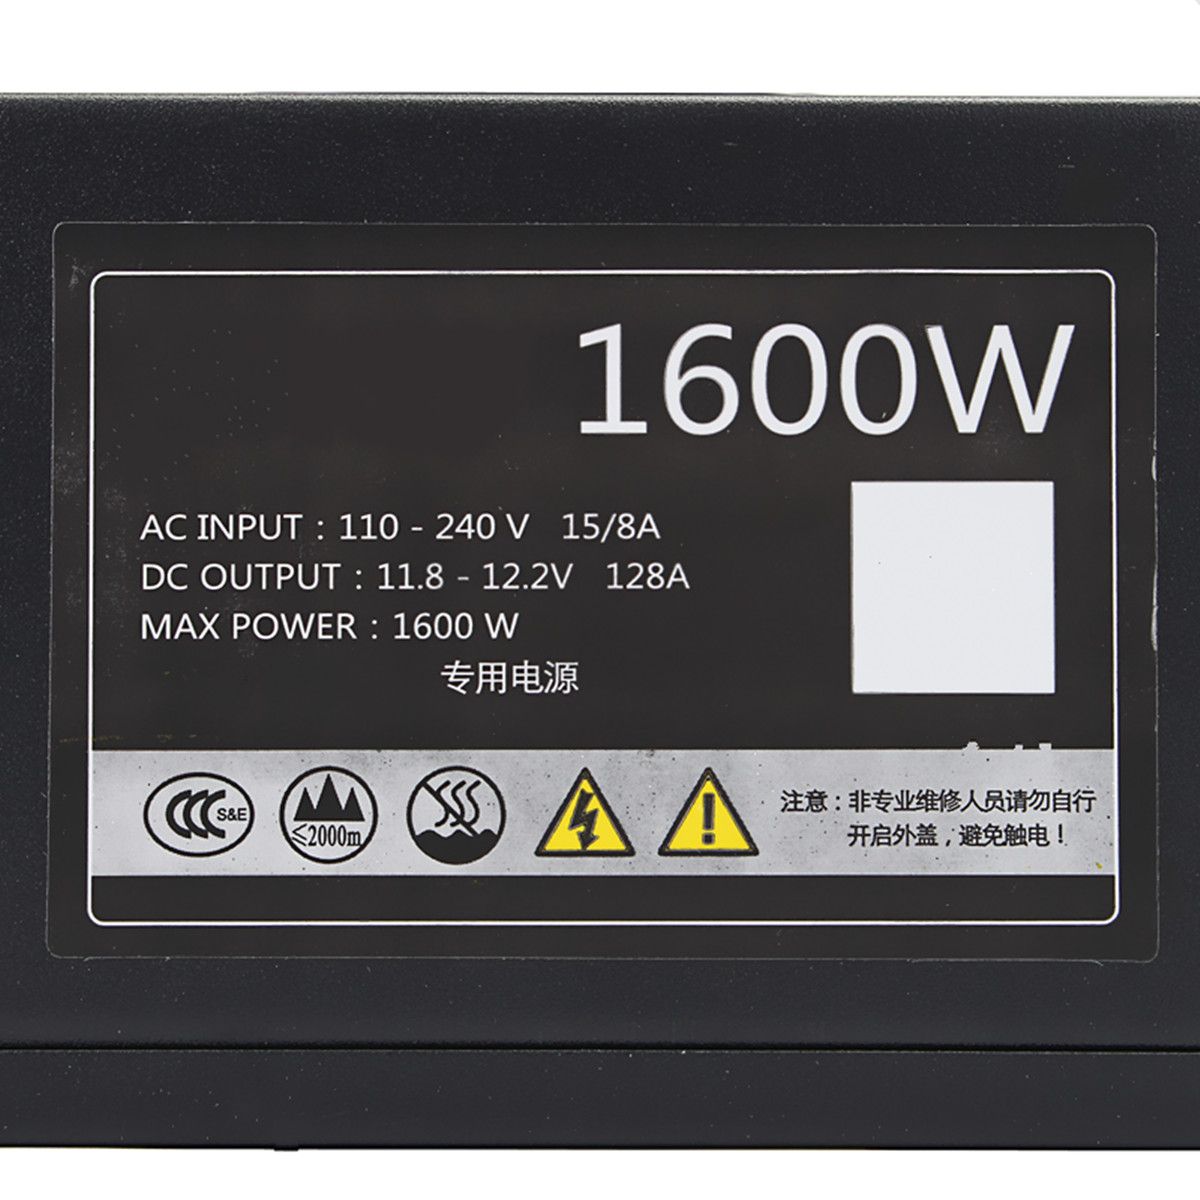 BTB1600W-Power-Supply-Suitable-For-A6-A7-S7-S9-L3-R4-Miner-10x6-Pin-1175060